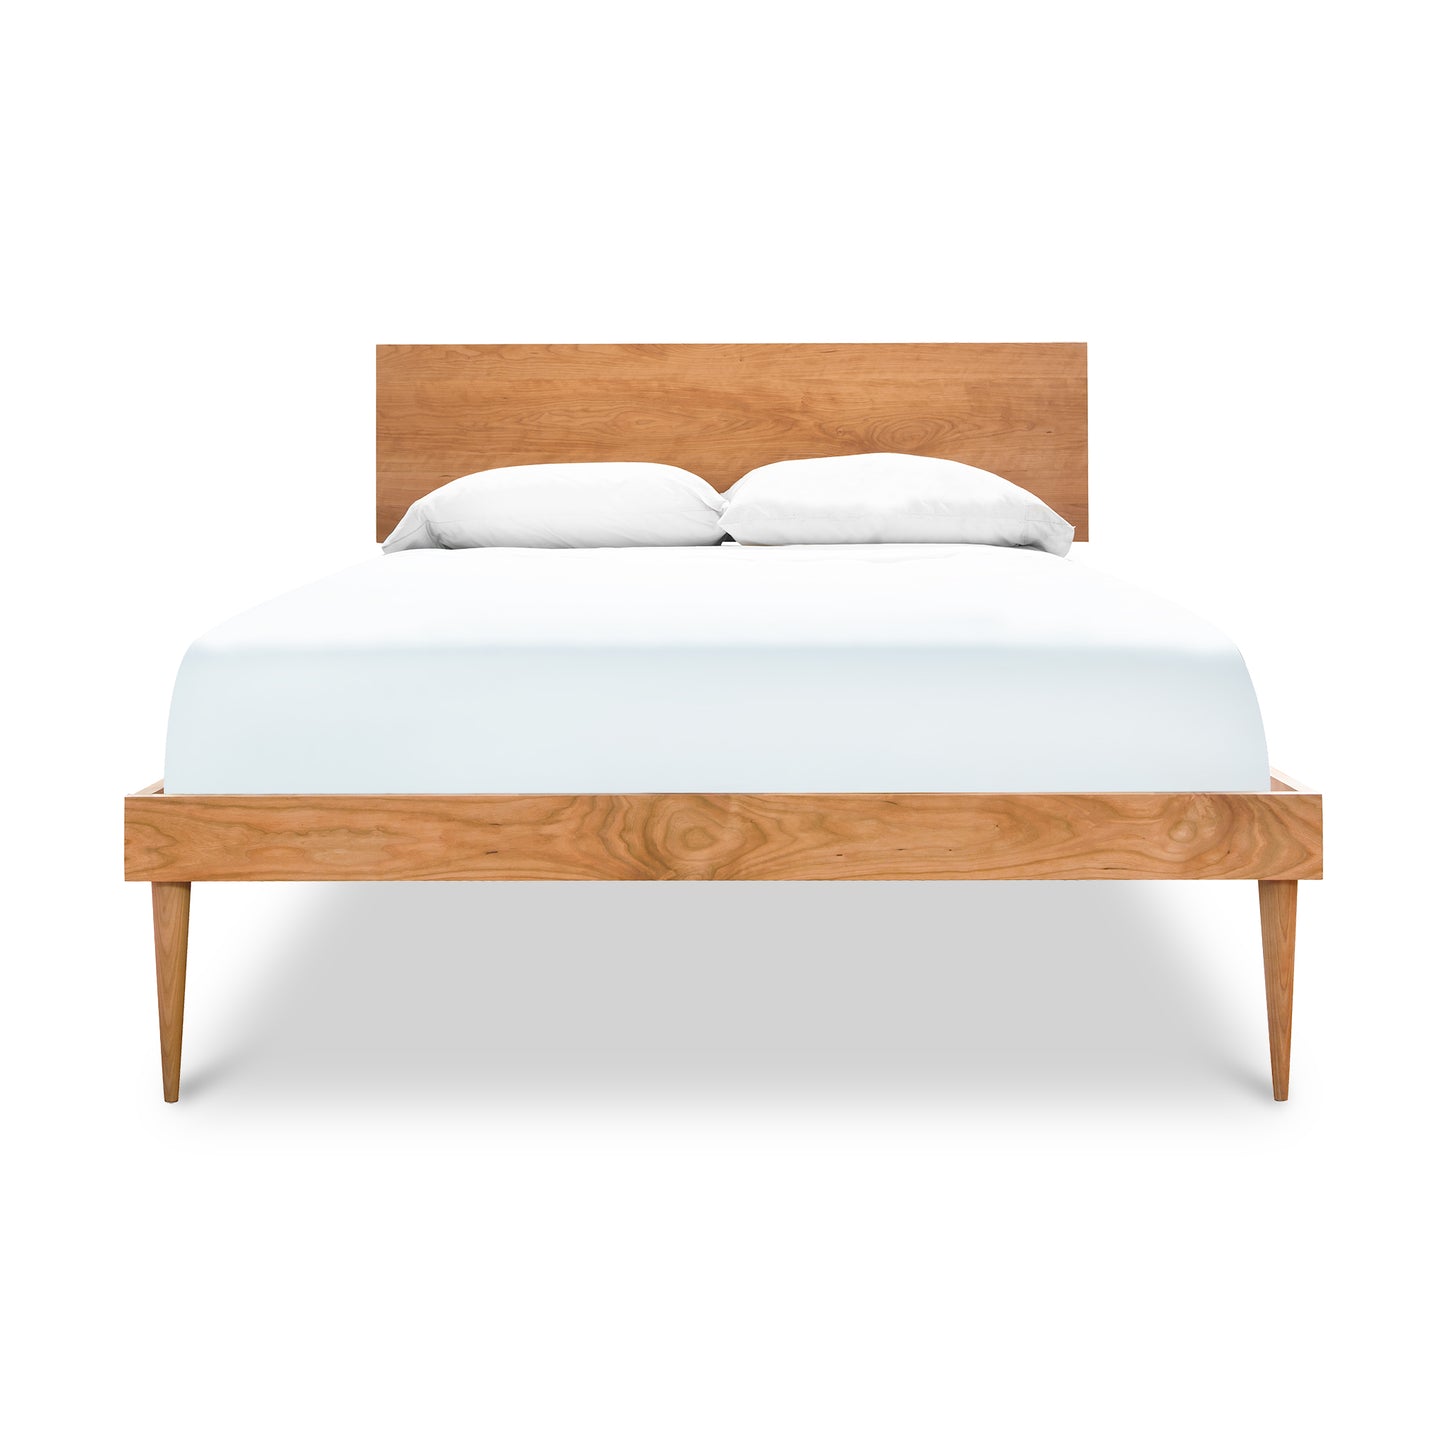 A Larssen Bed platform bed frame with a headboard, fitted with a white sheet and two pillows, isolated on a white background. (Brand: Vermont Furniture Designs)